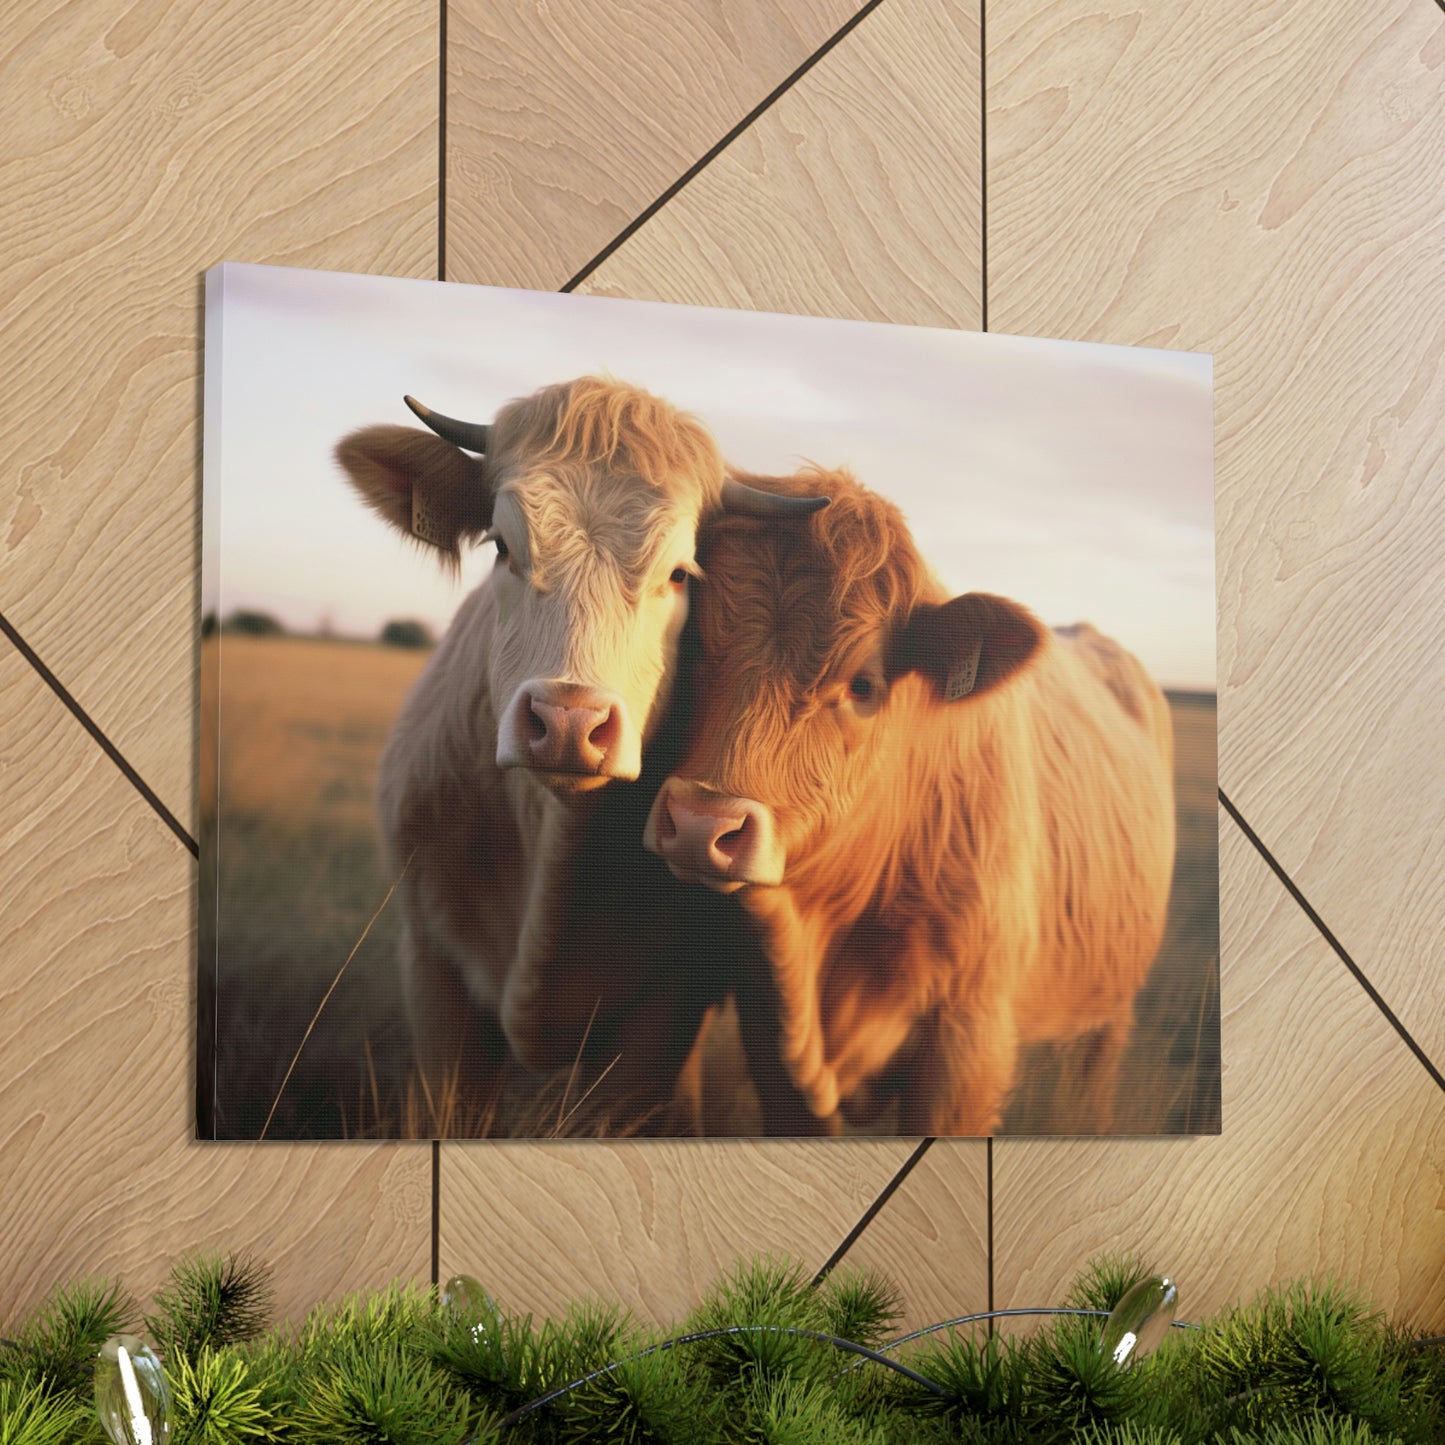 Canvas Gallery Wraps Cow Love 2